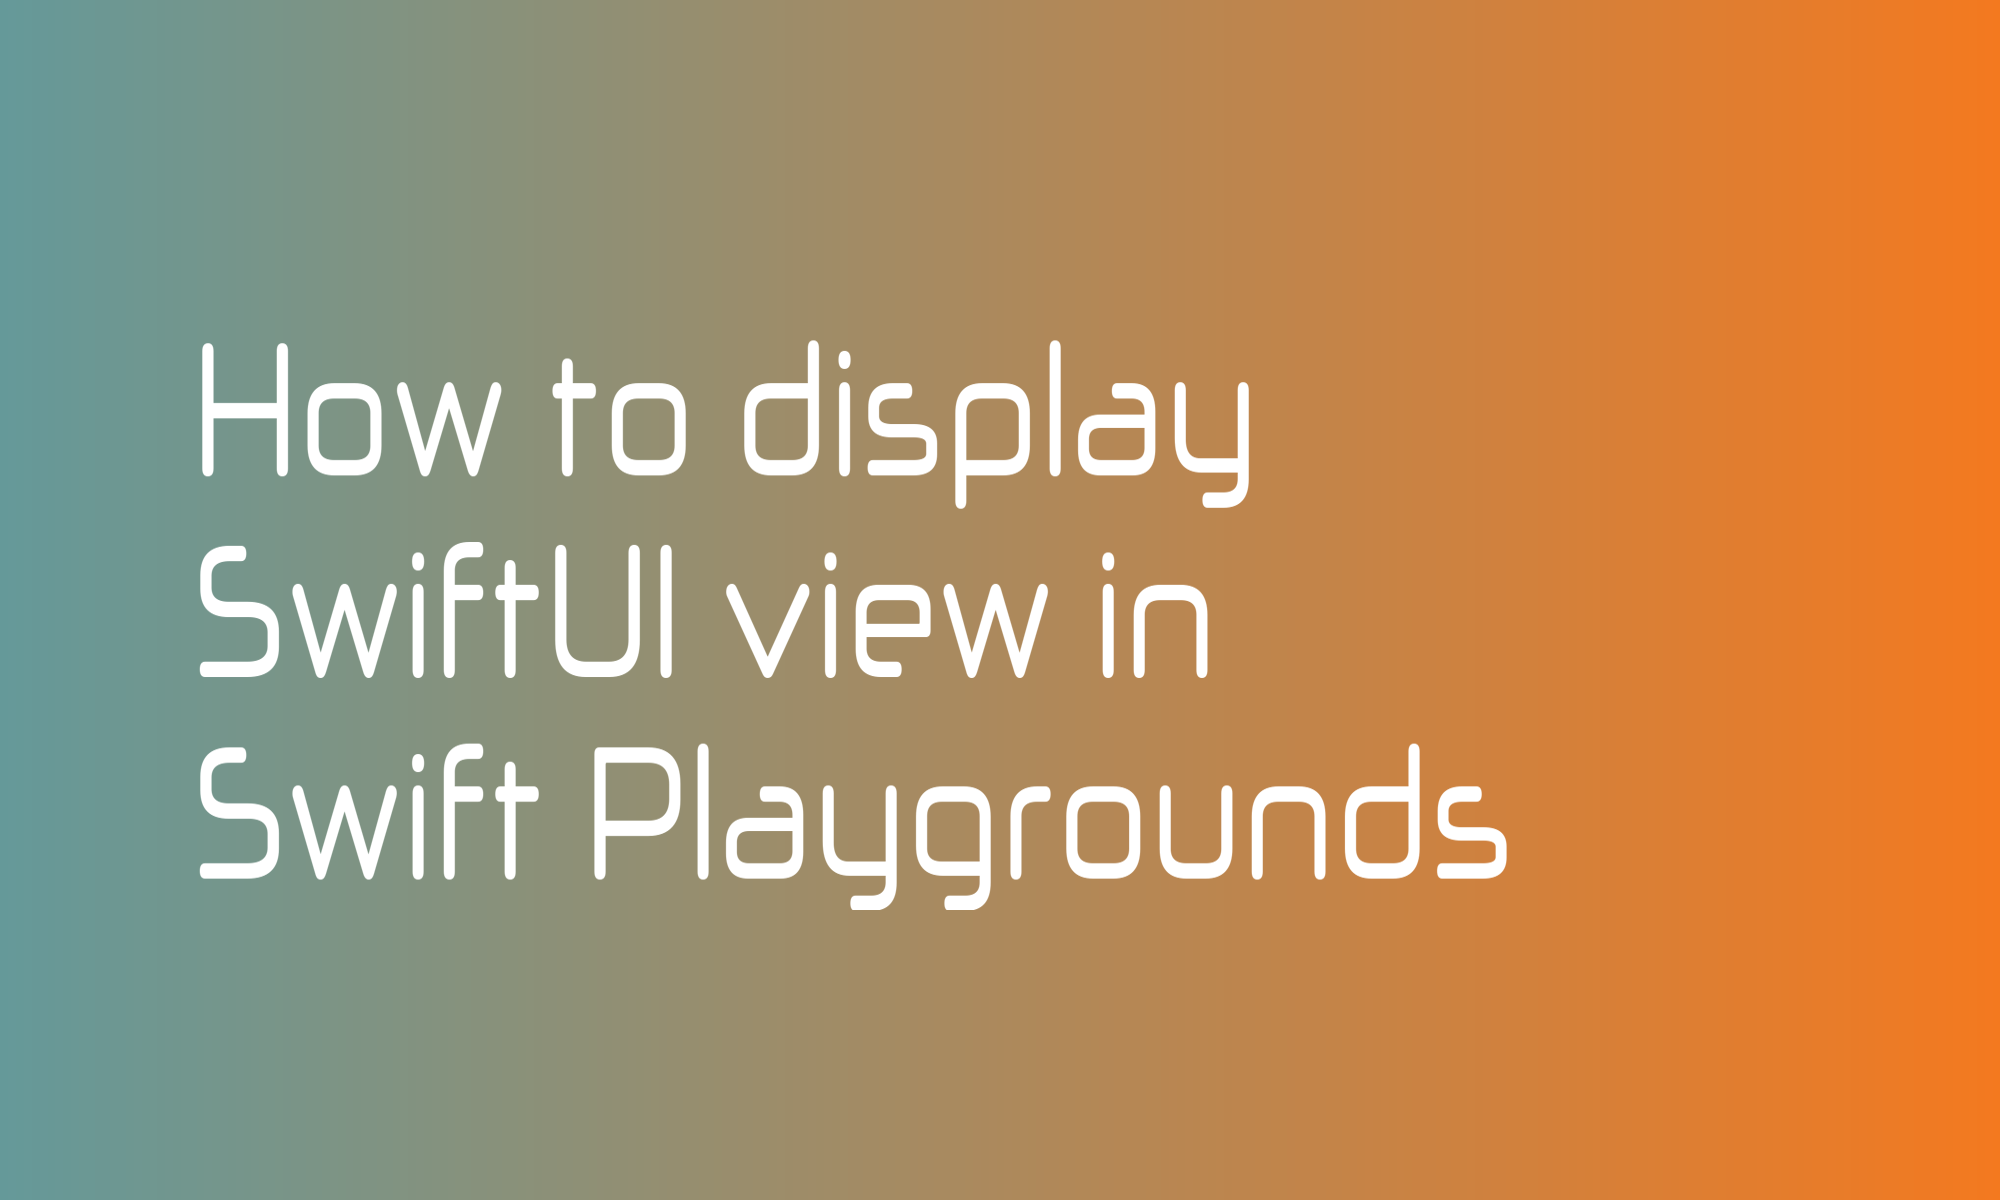 How to display SwiftUI view in Swift Playgrounds